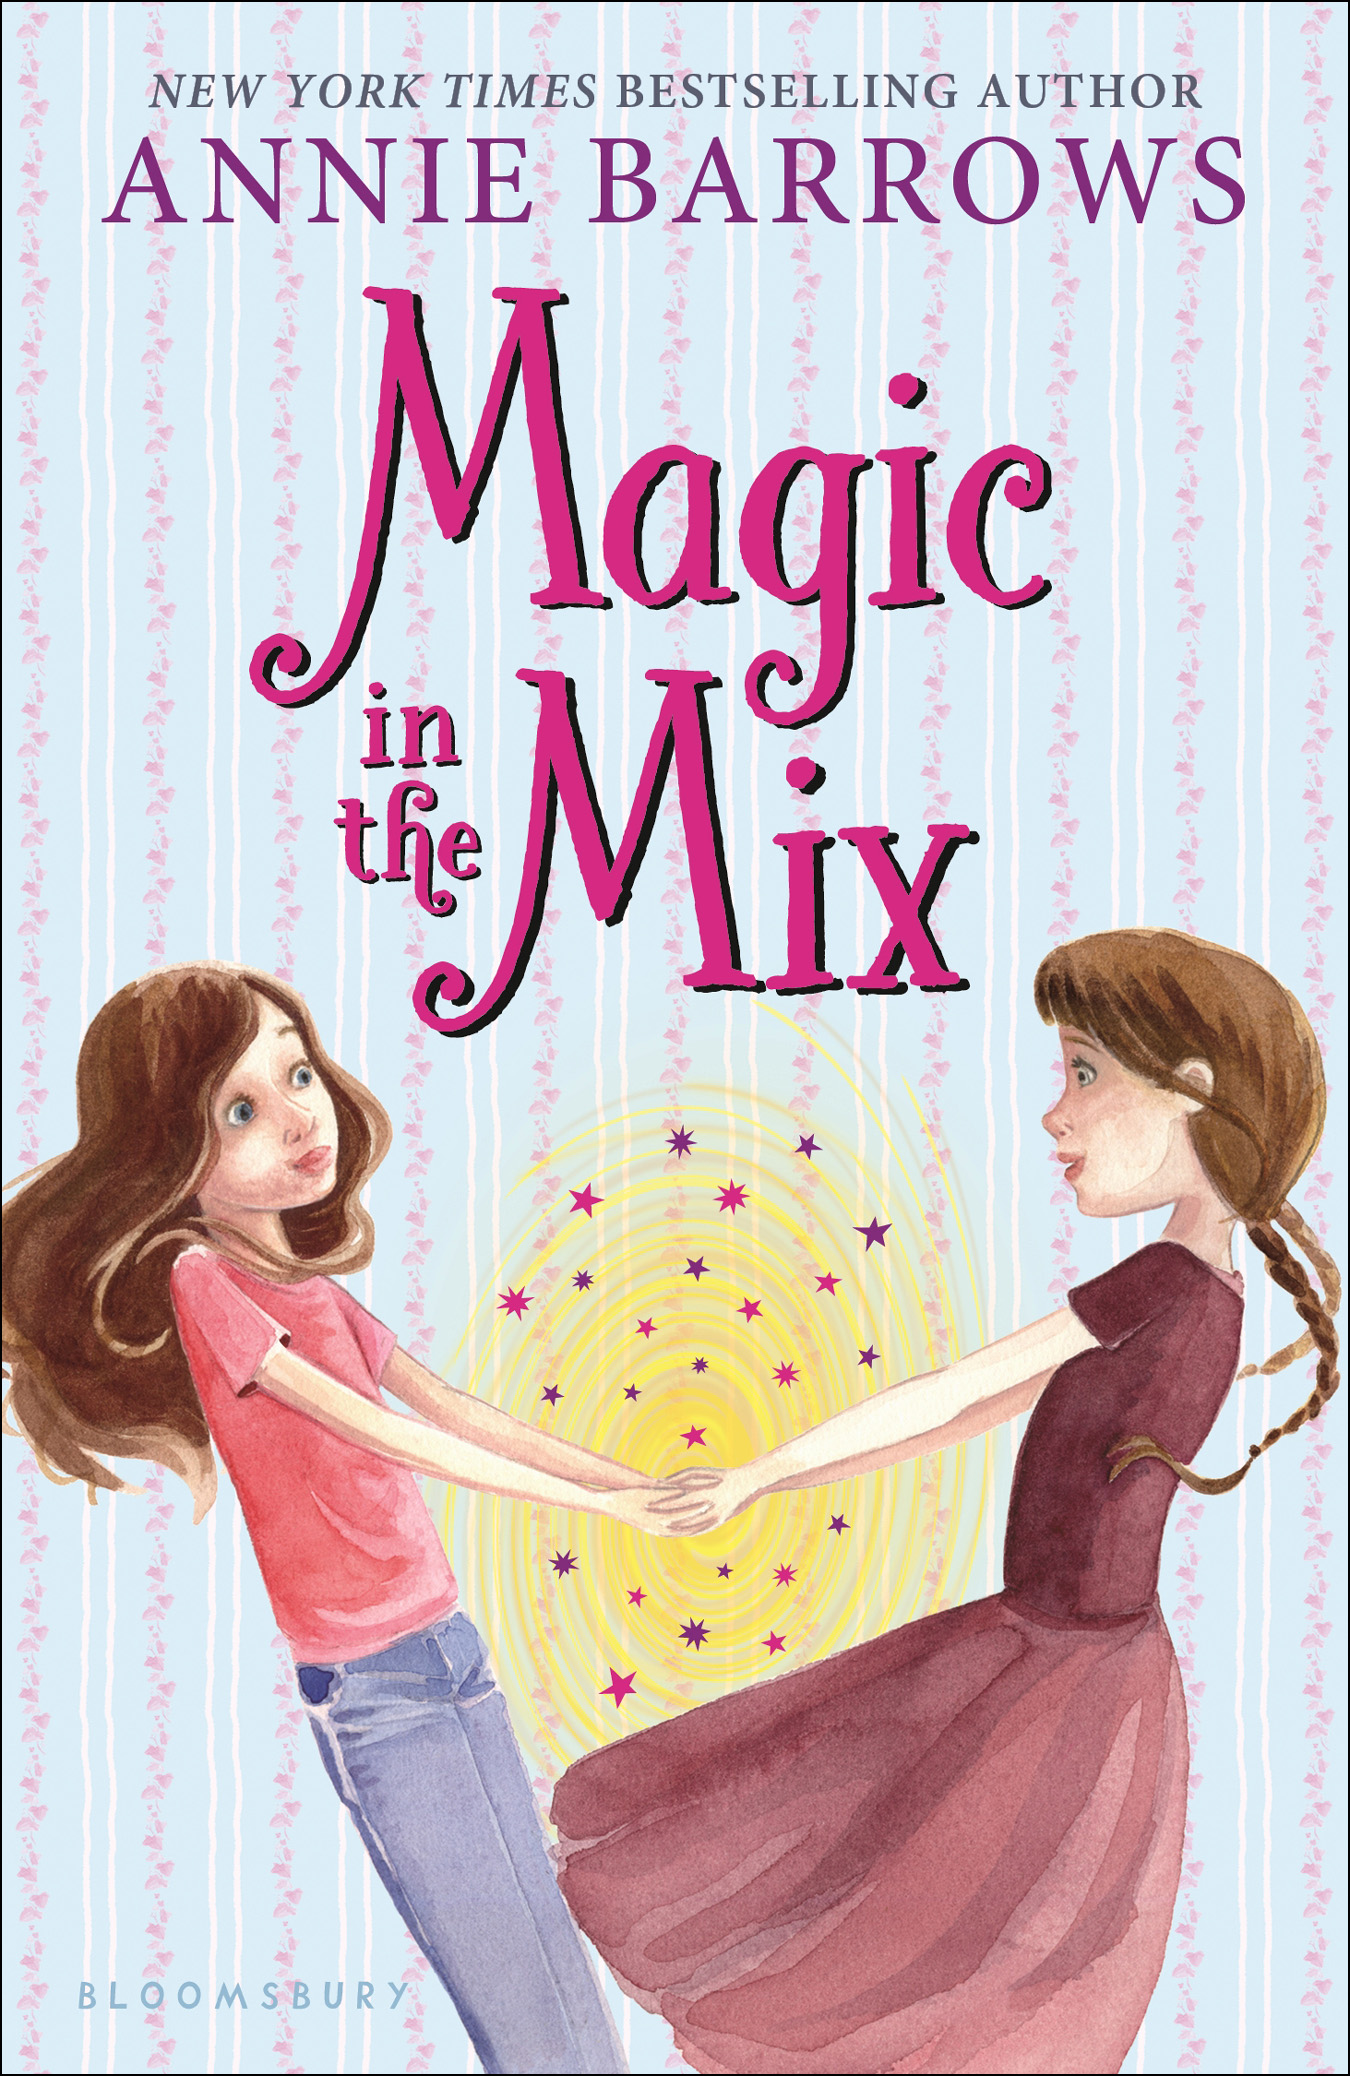 Magic in the Mix (2014) by Annie Barrows